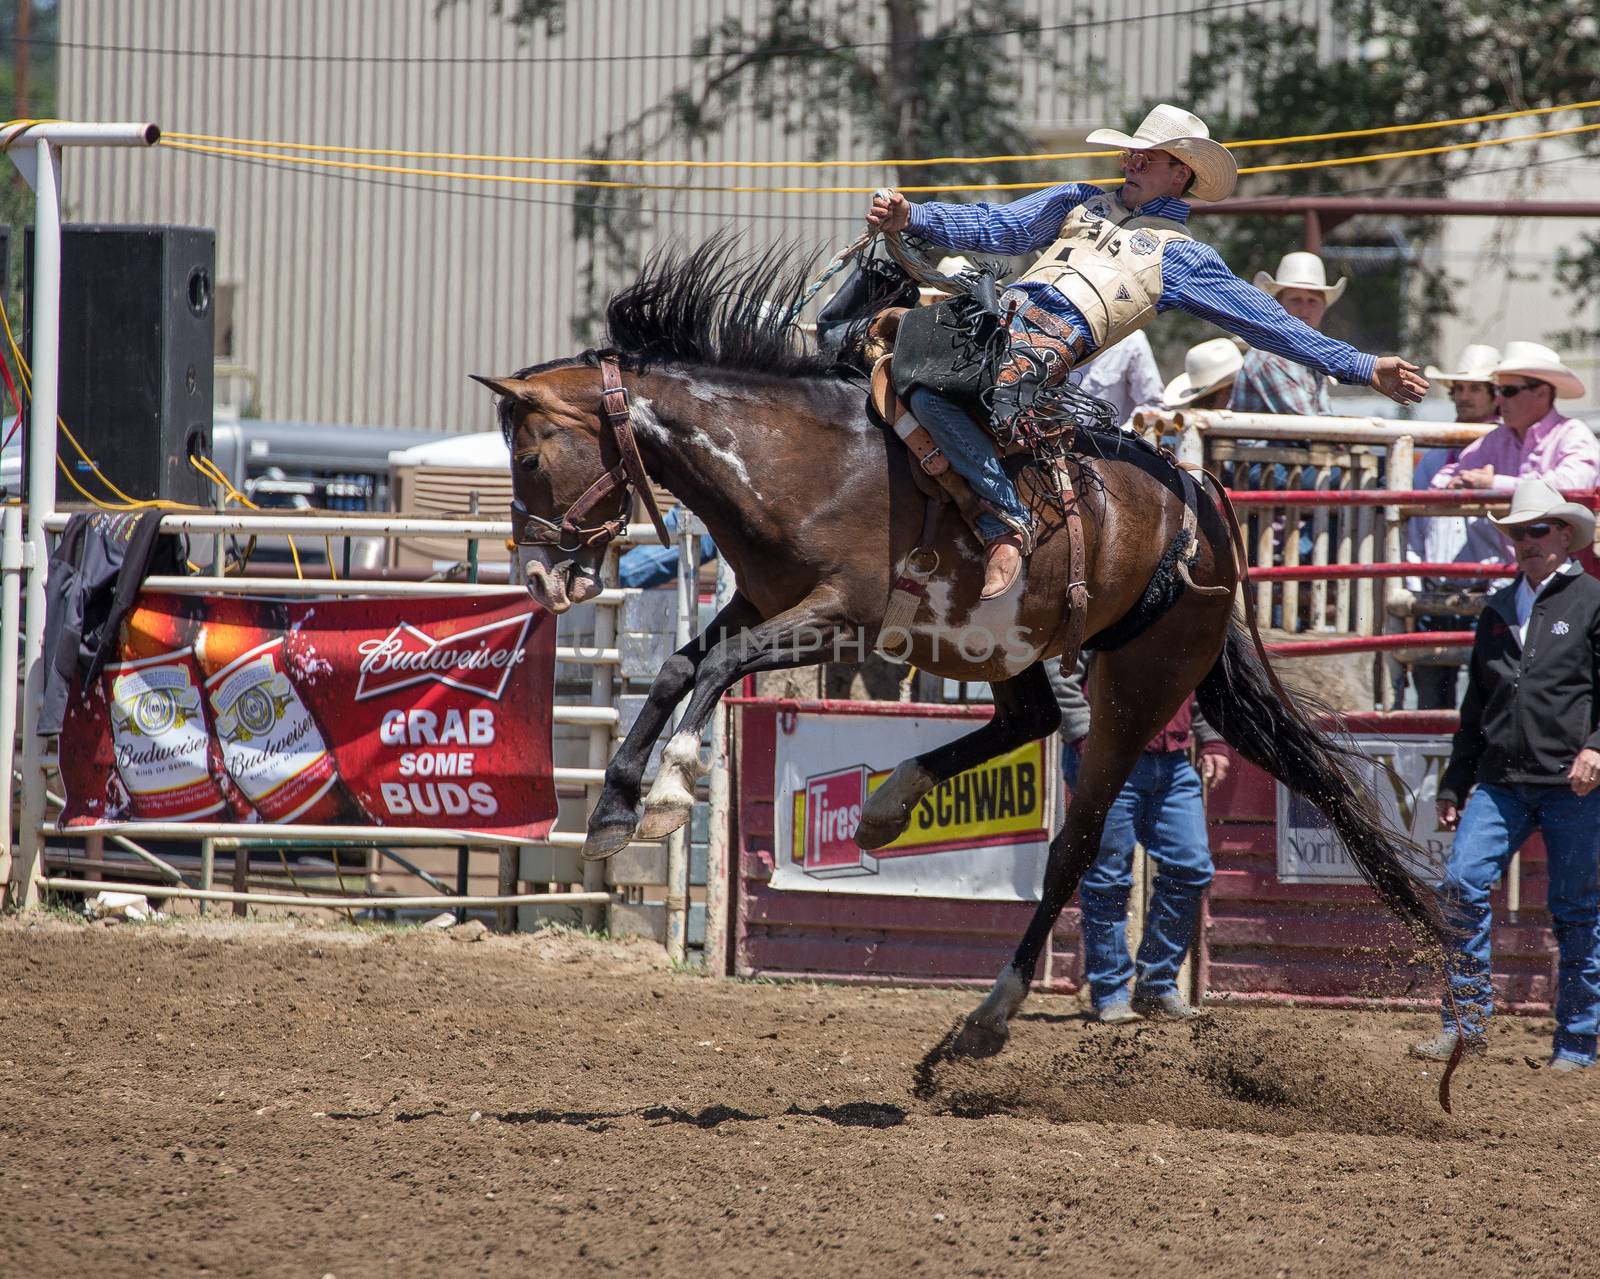 A cowboy is riding his bronc good and strong. The rodeo in Cottonwood, California is a popular event on Mother's Day weekend in this small northern California town. This photo was taken in May, 2014.